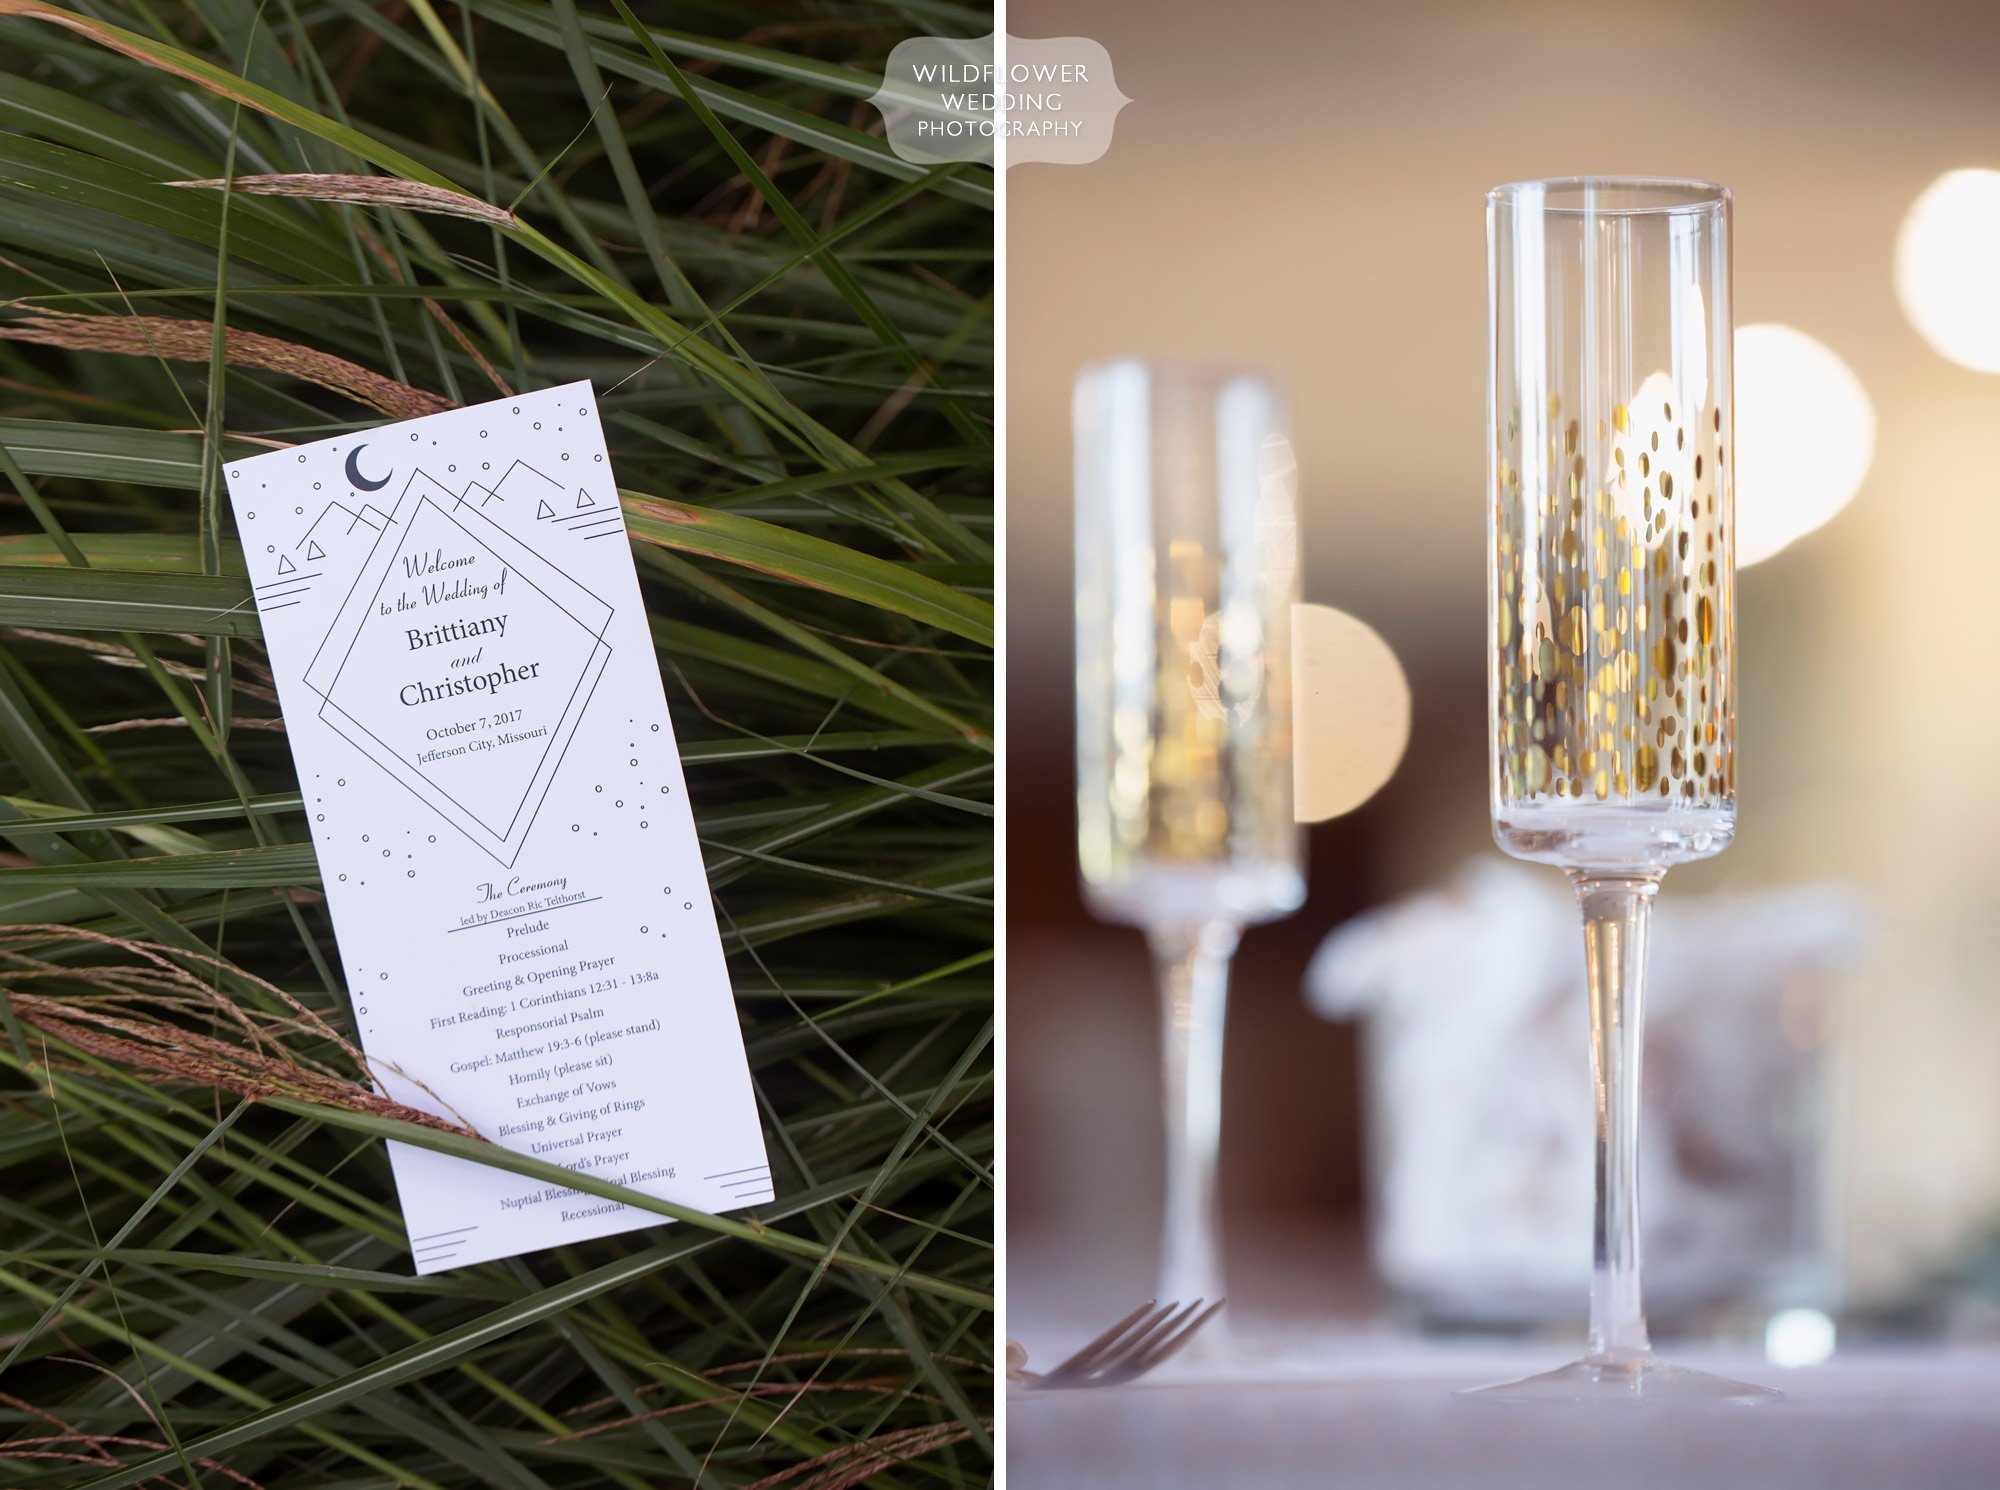 Rustic chic wedding details with polka dot champaign glasses at Jeff City CC.